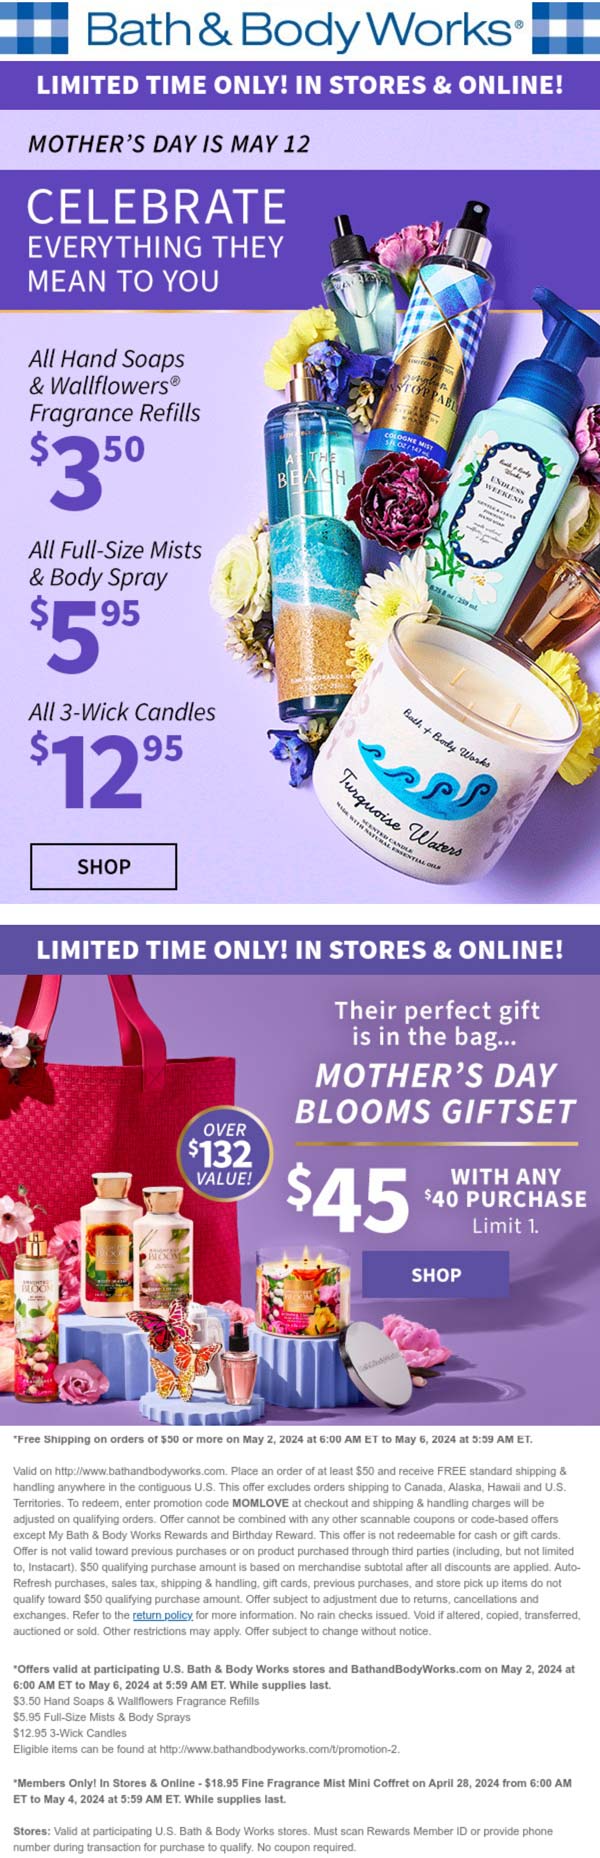 Bath & Body Works stores Coupon  $3.50 hand soaps & more at Bath & Body Works, or online via promo code MOMLOVE #bathbodyworks 